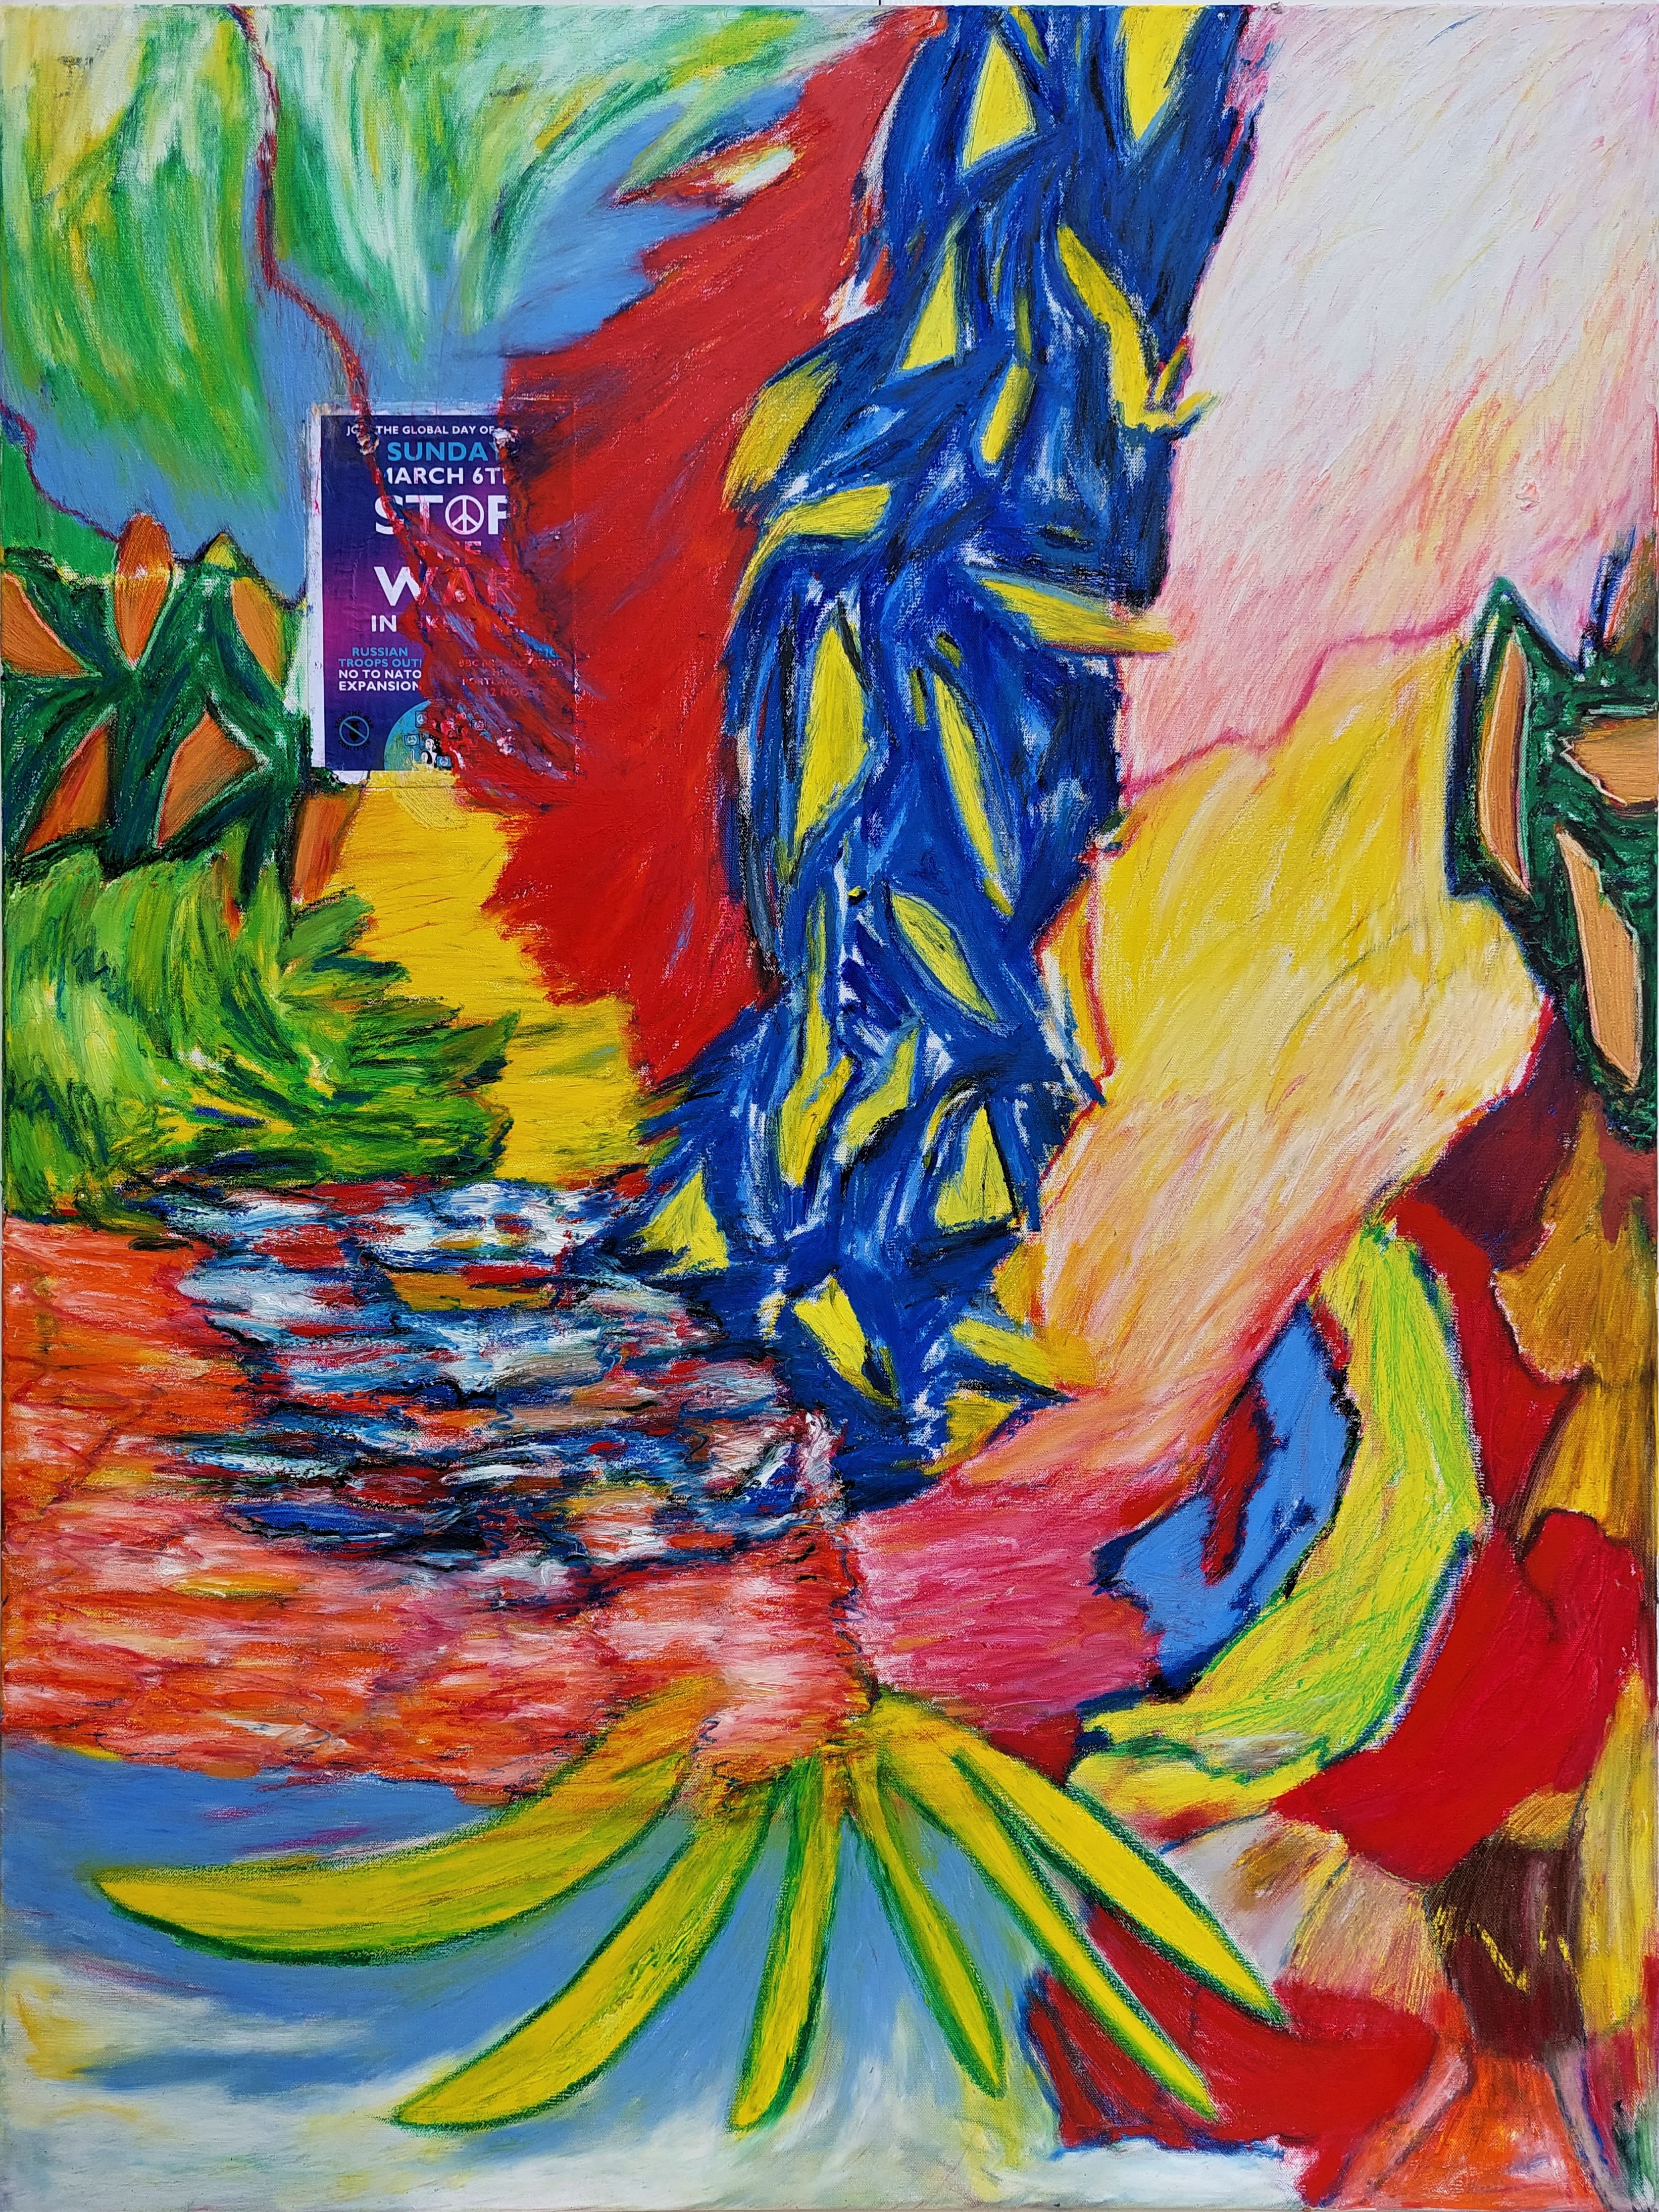 Colourful, abstract painting with a poster saying 'stop the war' glued onto it in the top left corner.